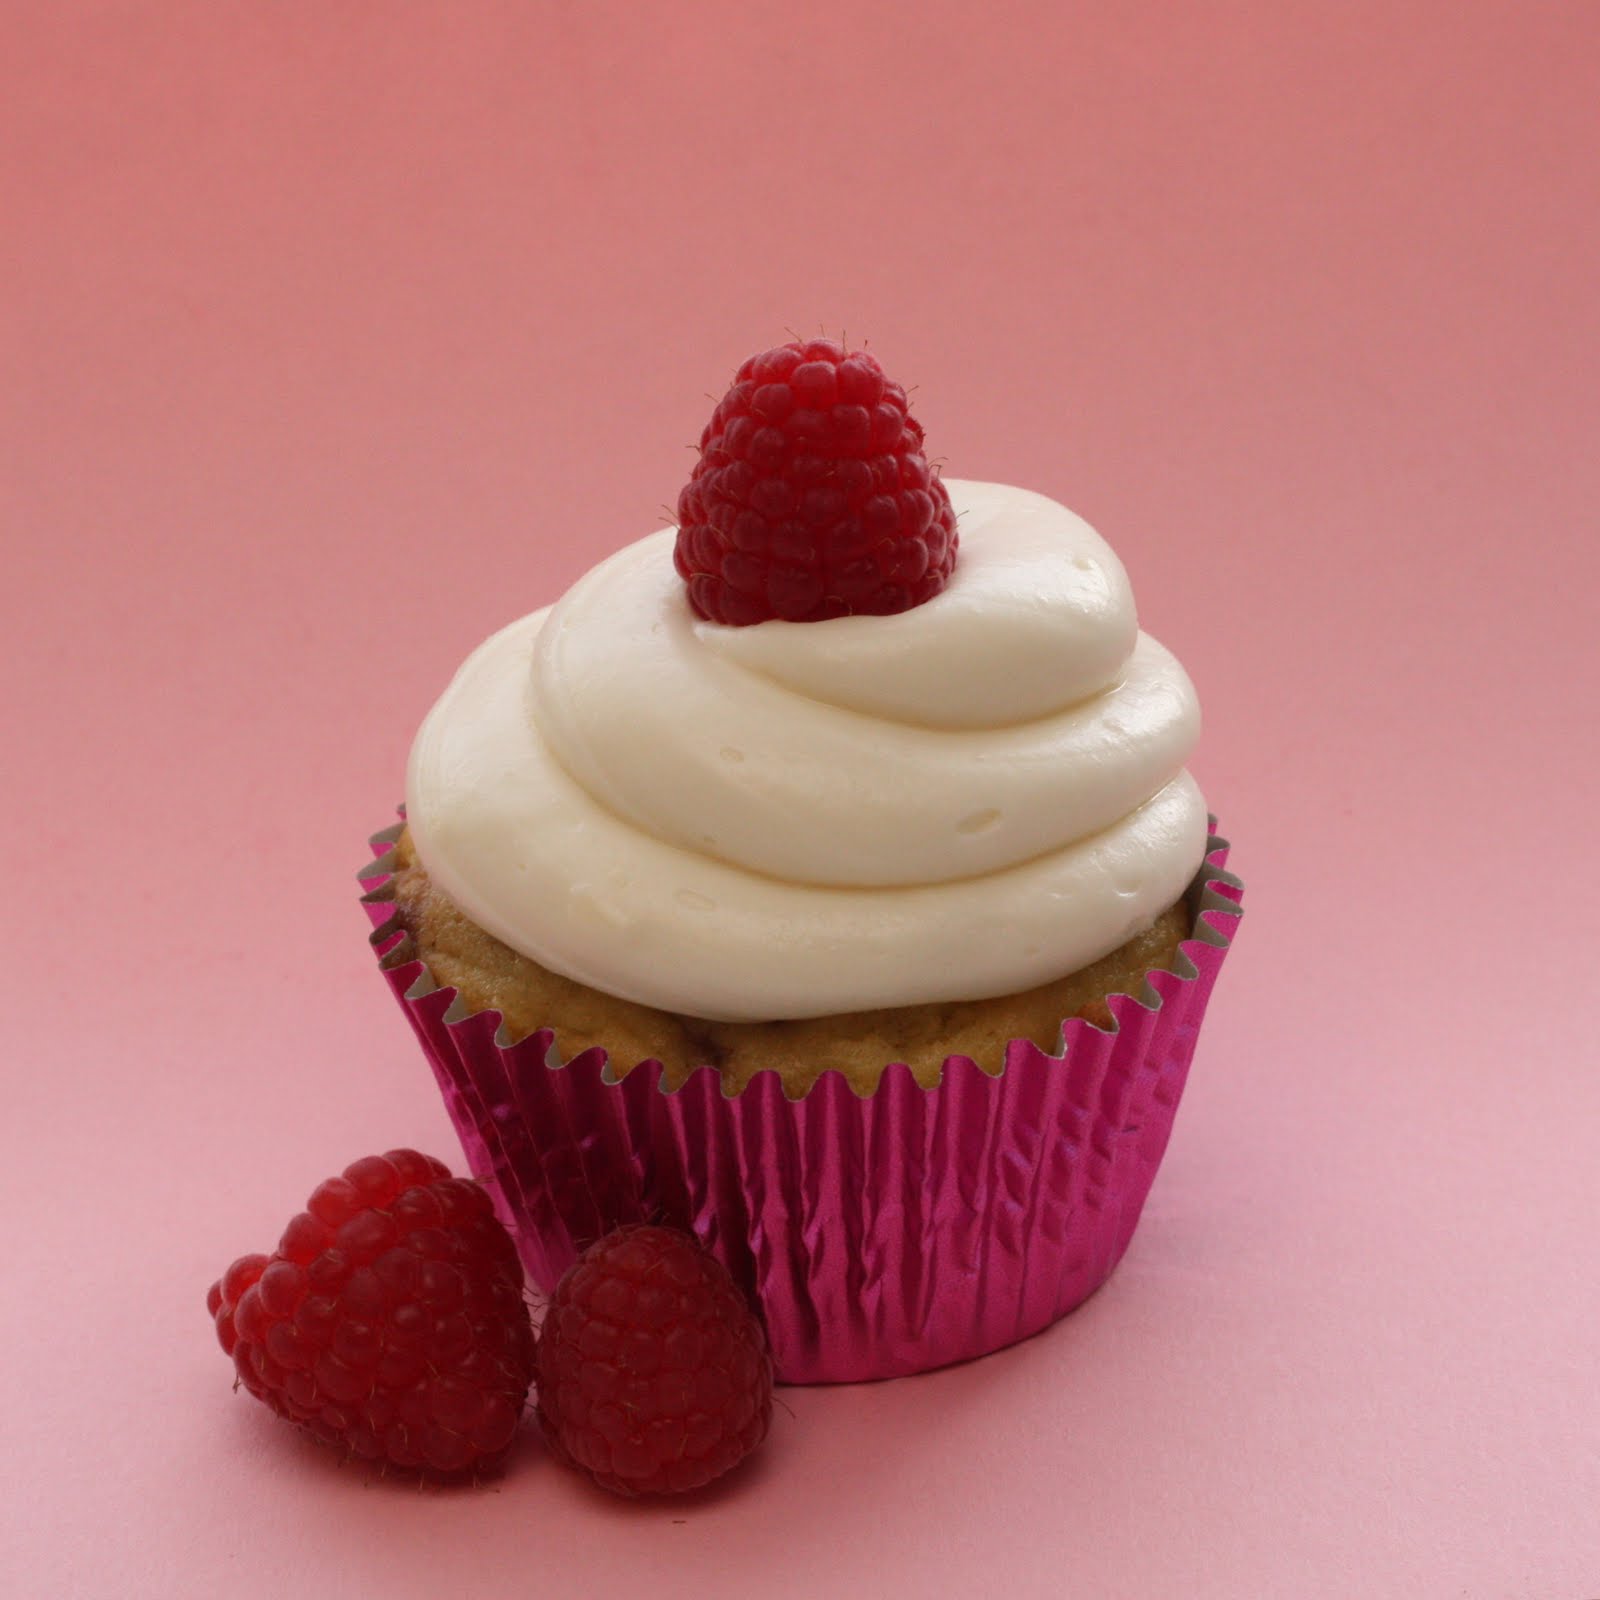 The Doctor's Dishes, Desserts & Decor: Raspberry Cream Cheese Cupcakes